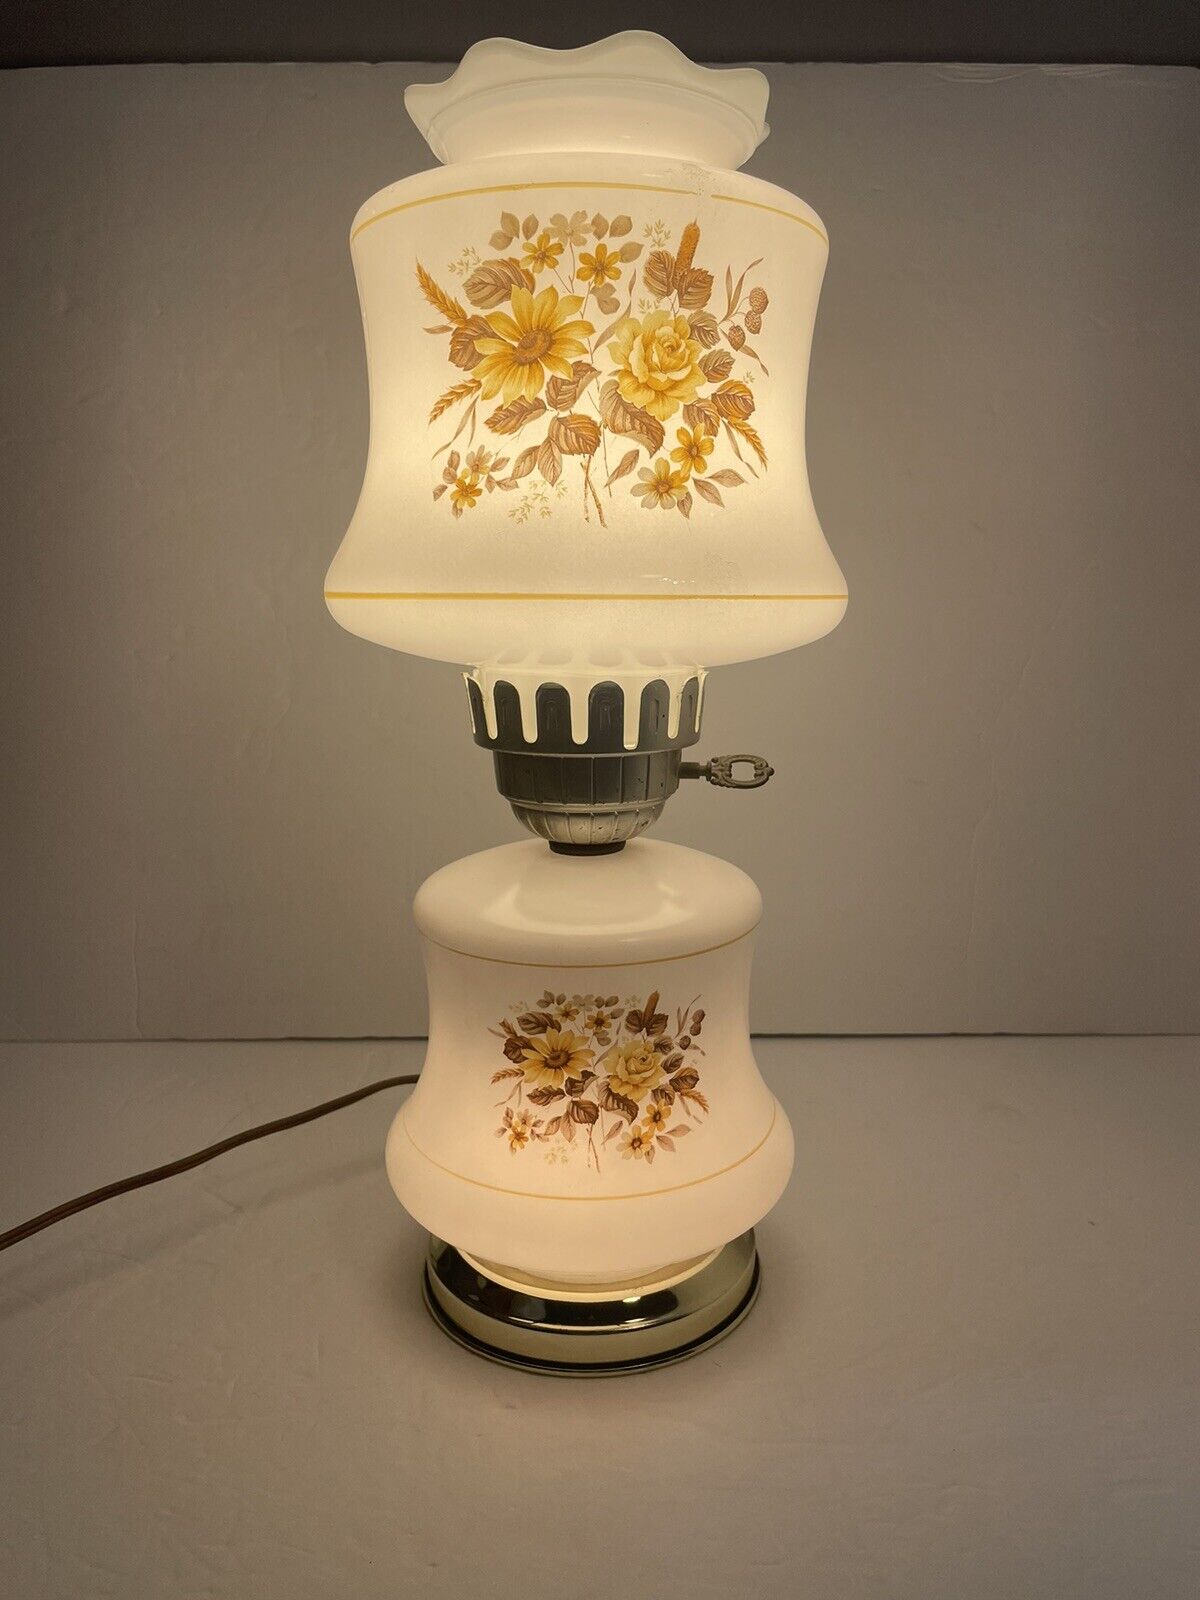 Vintage Hurricane Lamp 3 way- Milk Glass White with Yellow and Brown Flowers